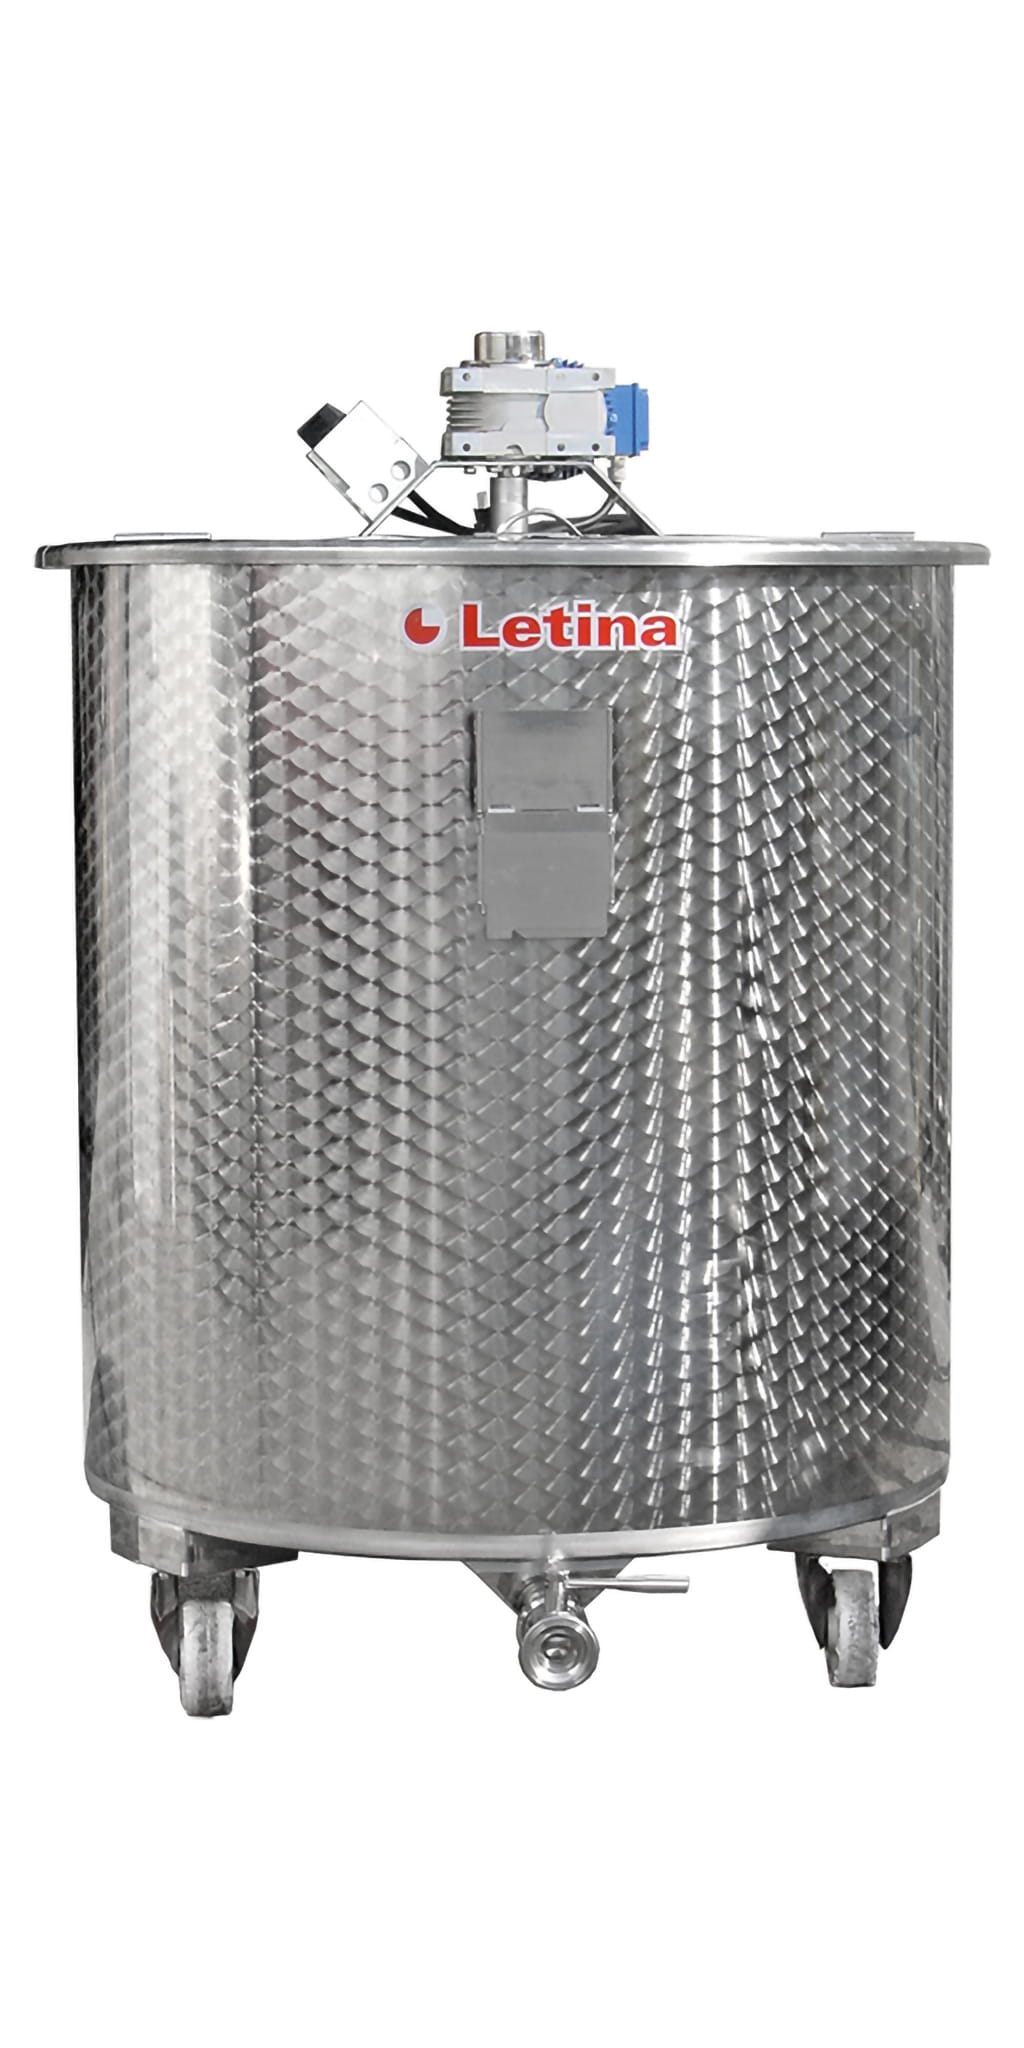 M] Stainless Steel Tank With Agitator Letina